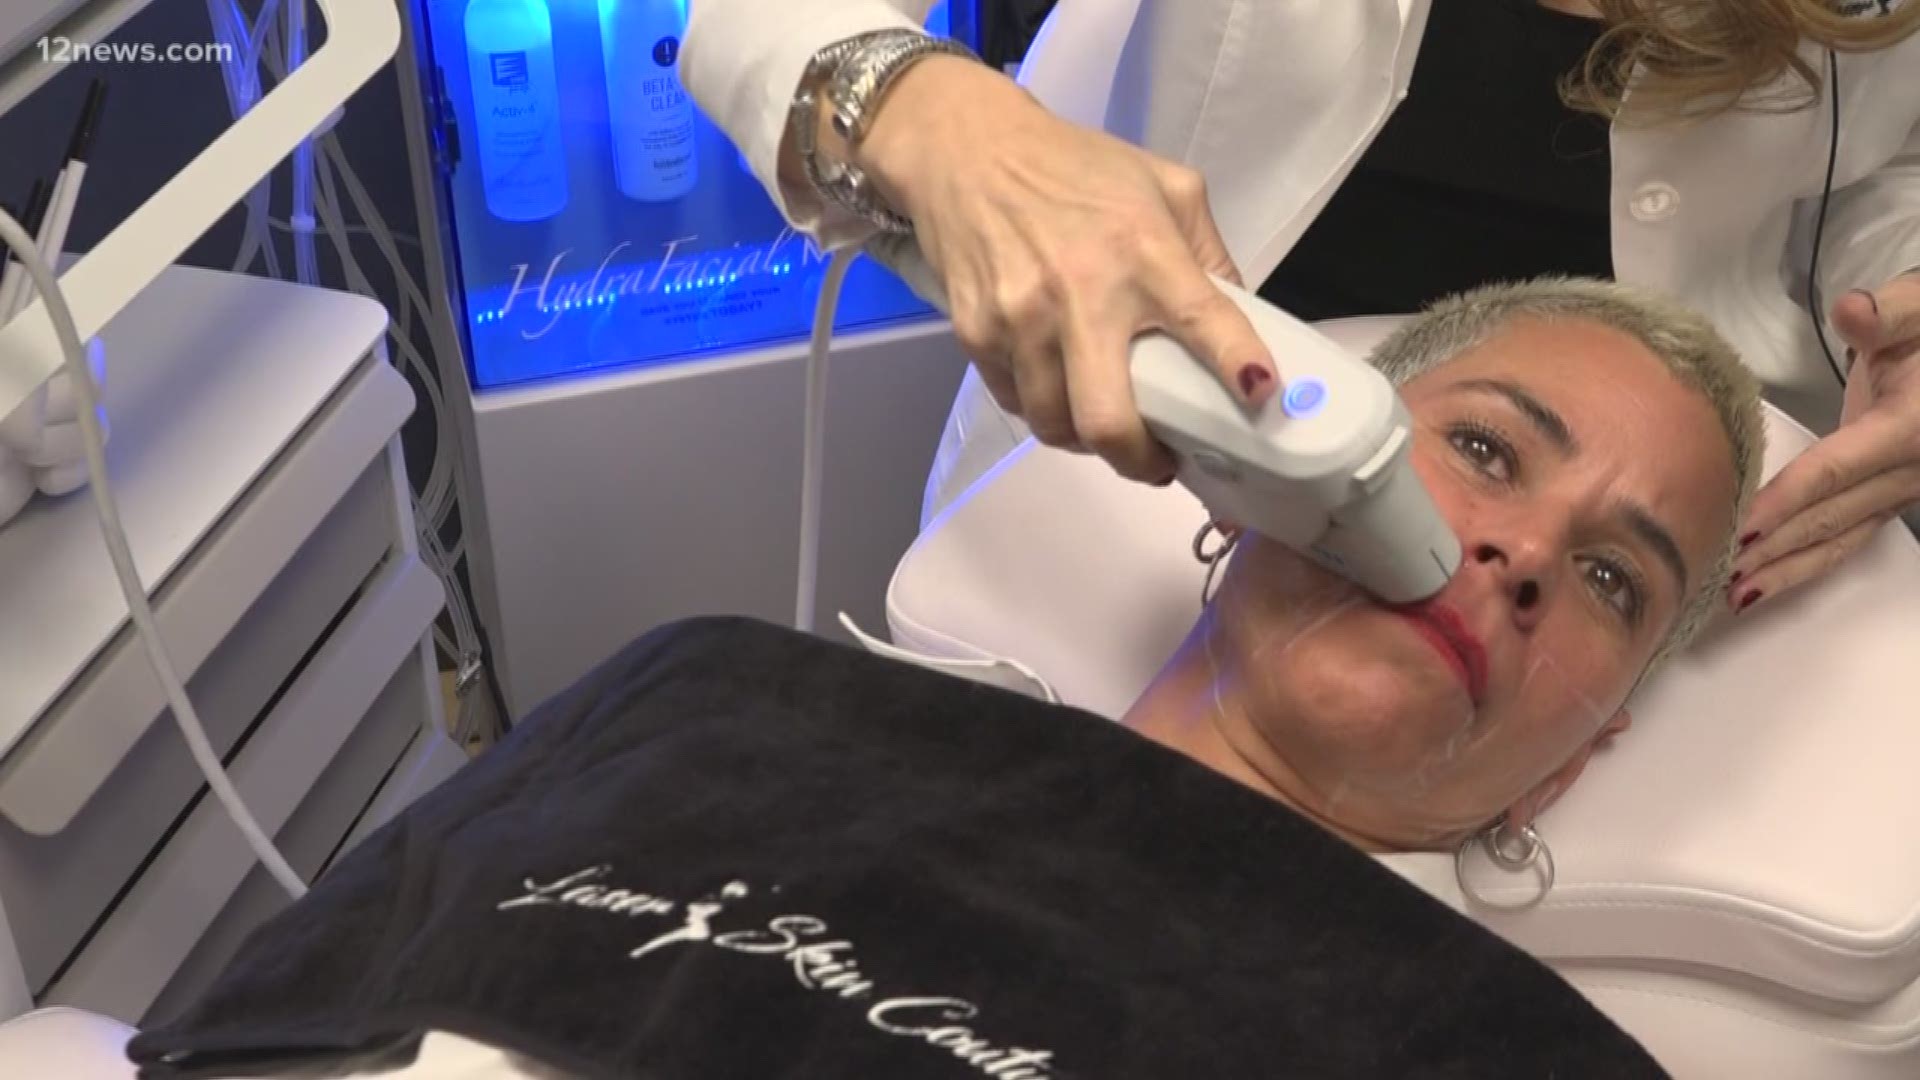 Ultrasound skin therapy and new age oxygen facials are non-invasive ways to tighten your skin.